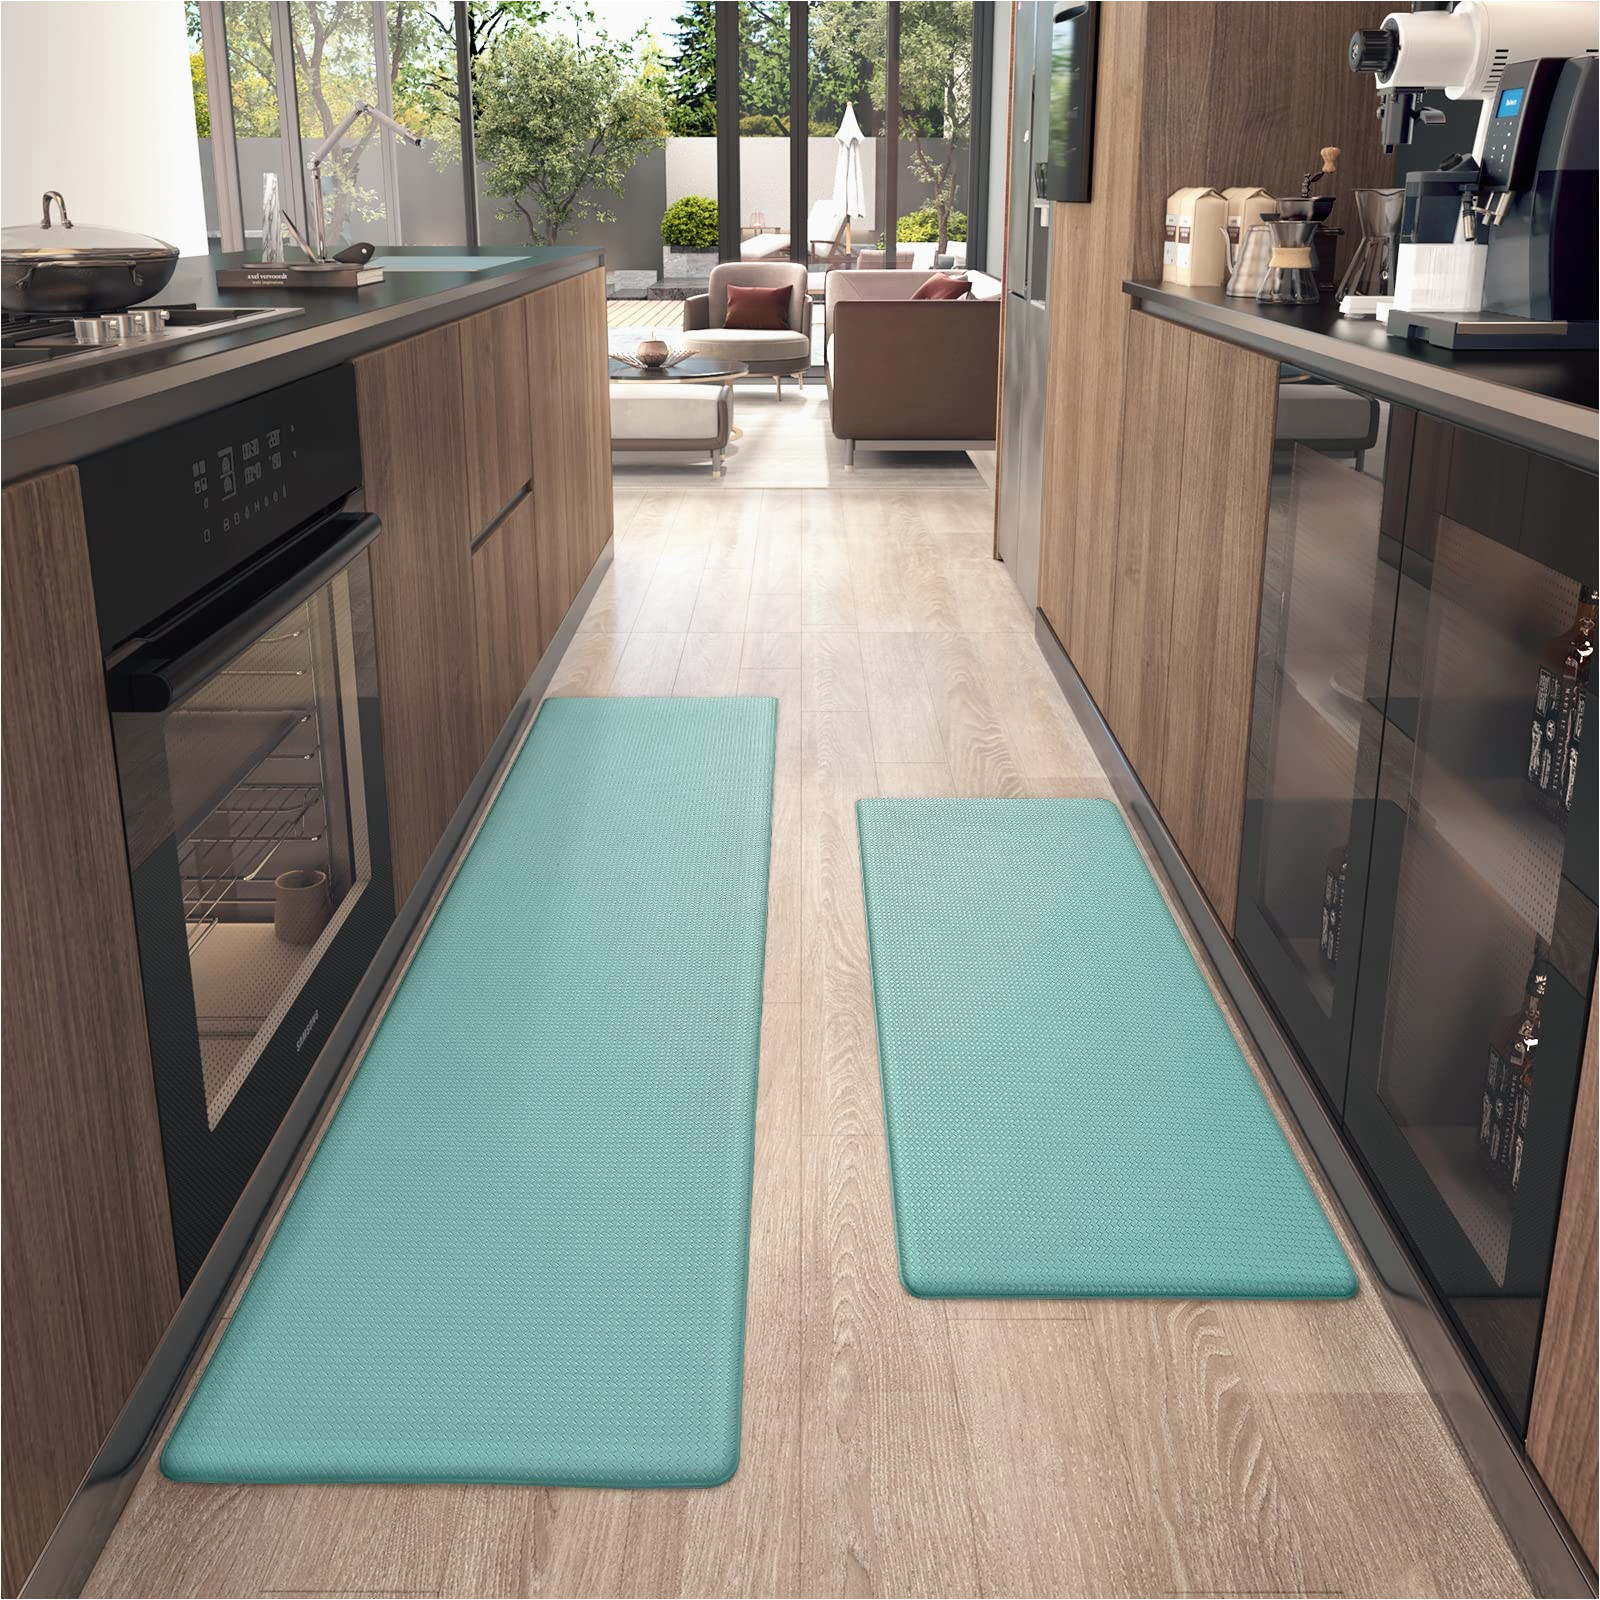 Teal Blue Kitchen Rugs Color G Kitchen Rugs, Kitchen Rug Set 2 Piece Kitchen Runner Rug Kitchen Floor Mat, Cushioned Anti Fatigue Kitchen Mat Non Skid Waterproof Comfort …